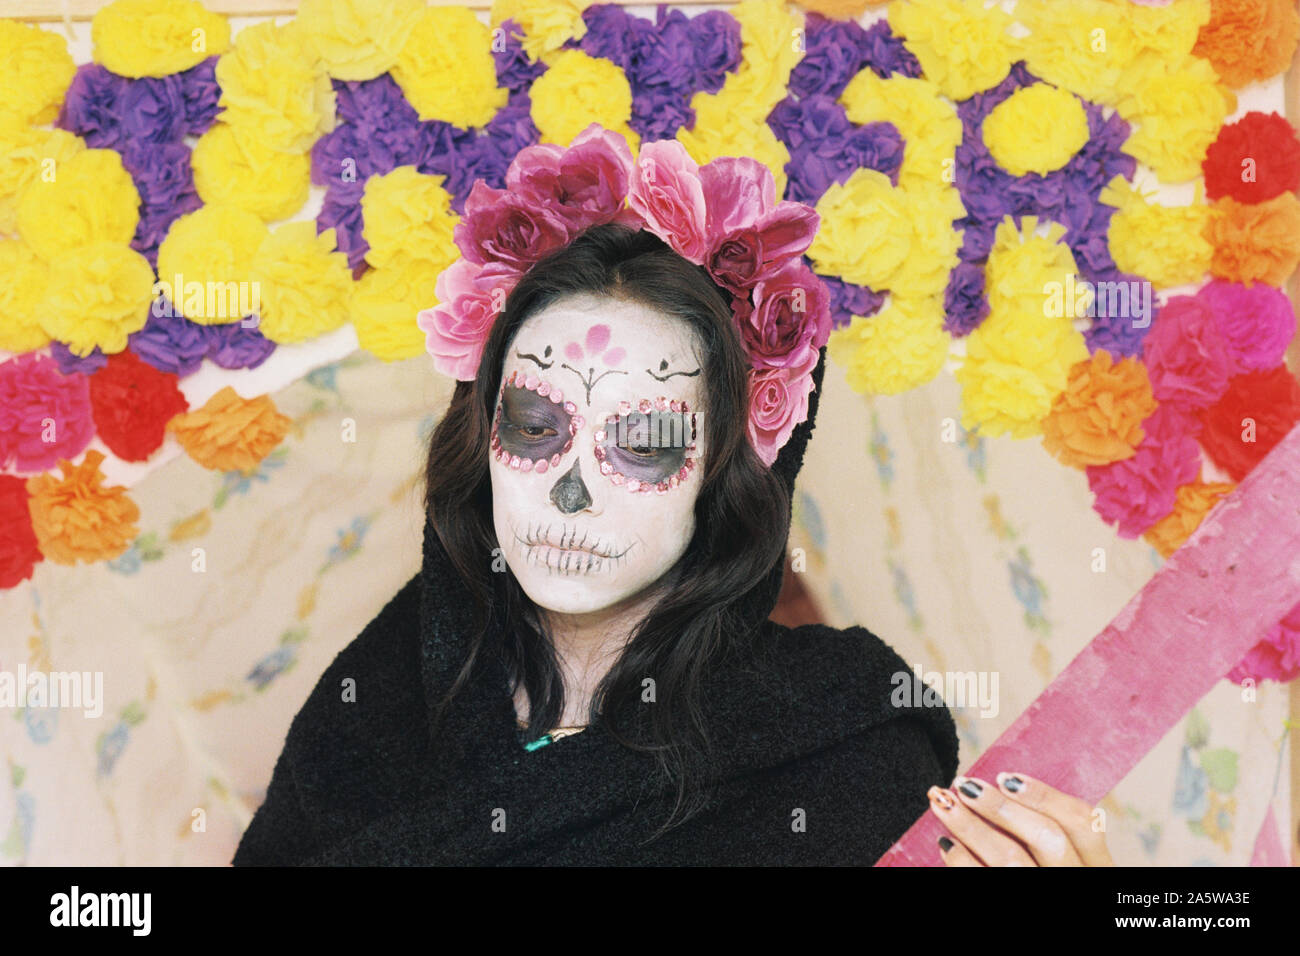 Merida, Yucatan, Mexico - October 30, 2015: Mexican young girl in Catrina makeup for the Day of the Dead or Hanal Pixan celebration Stock Photo